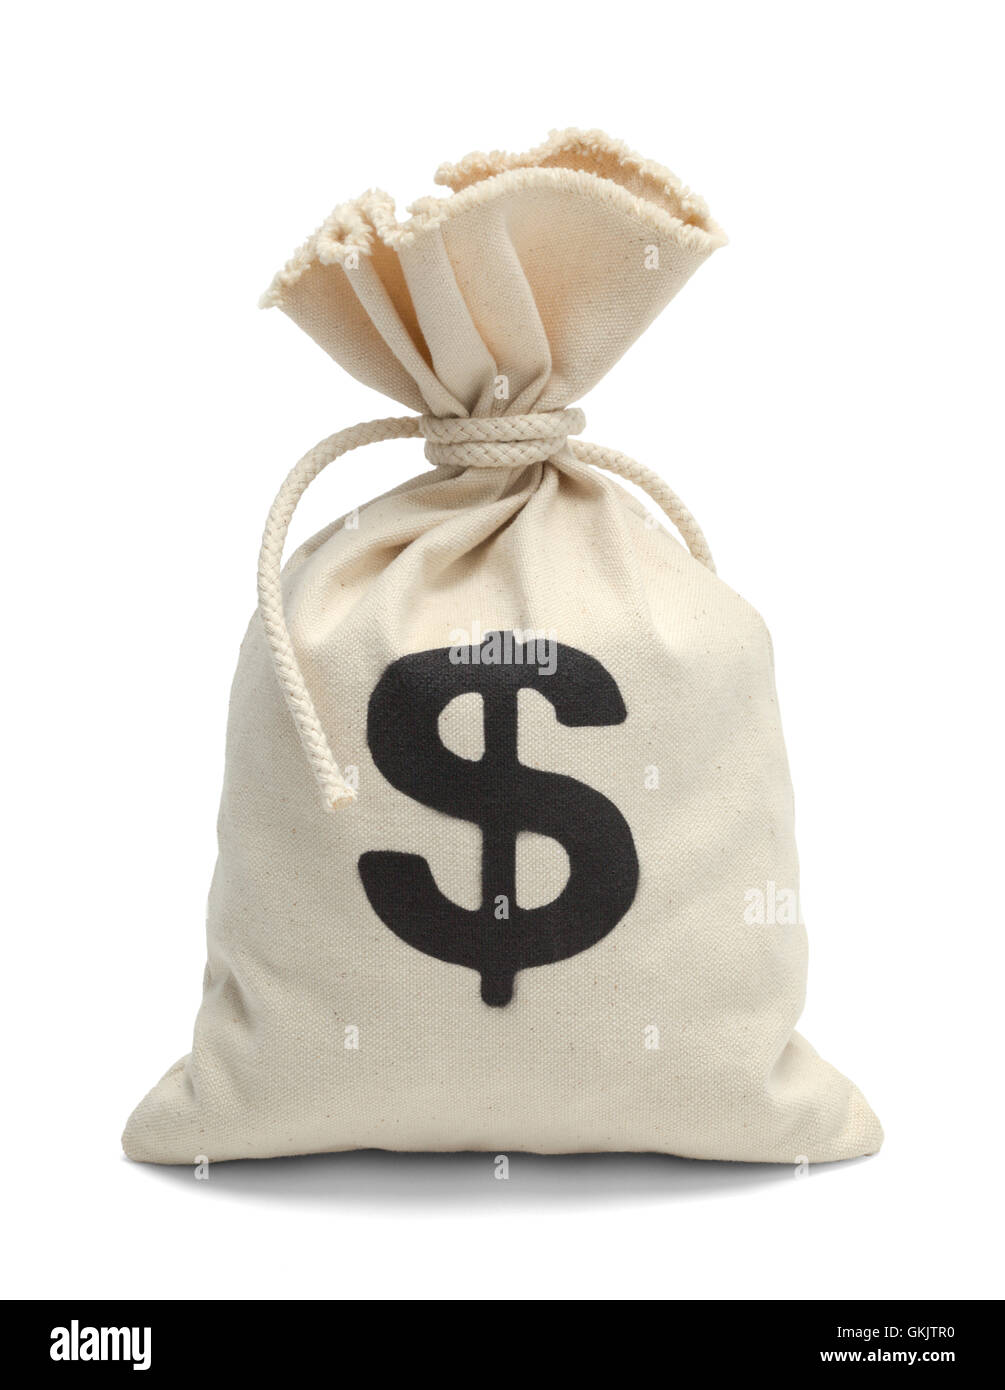 Tied Bank Bag of Money Isolated on White Background. Stock Photo